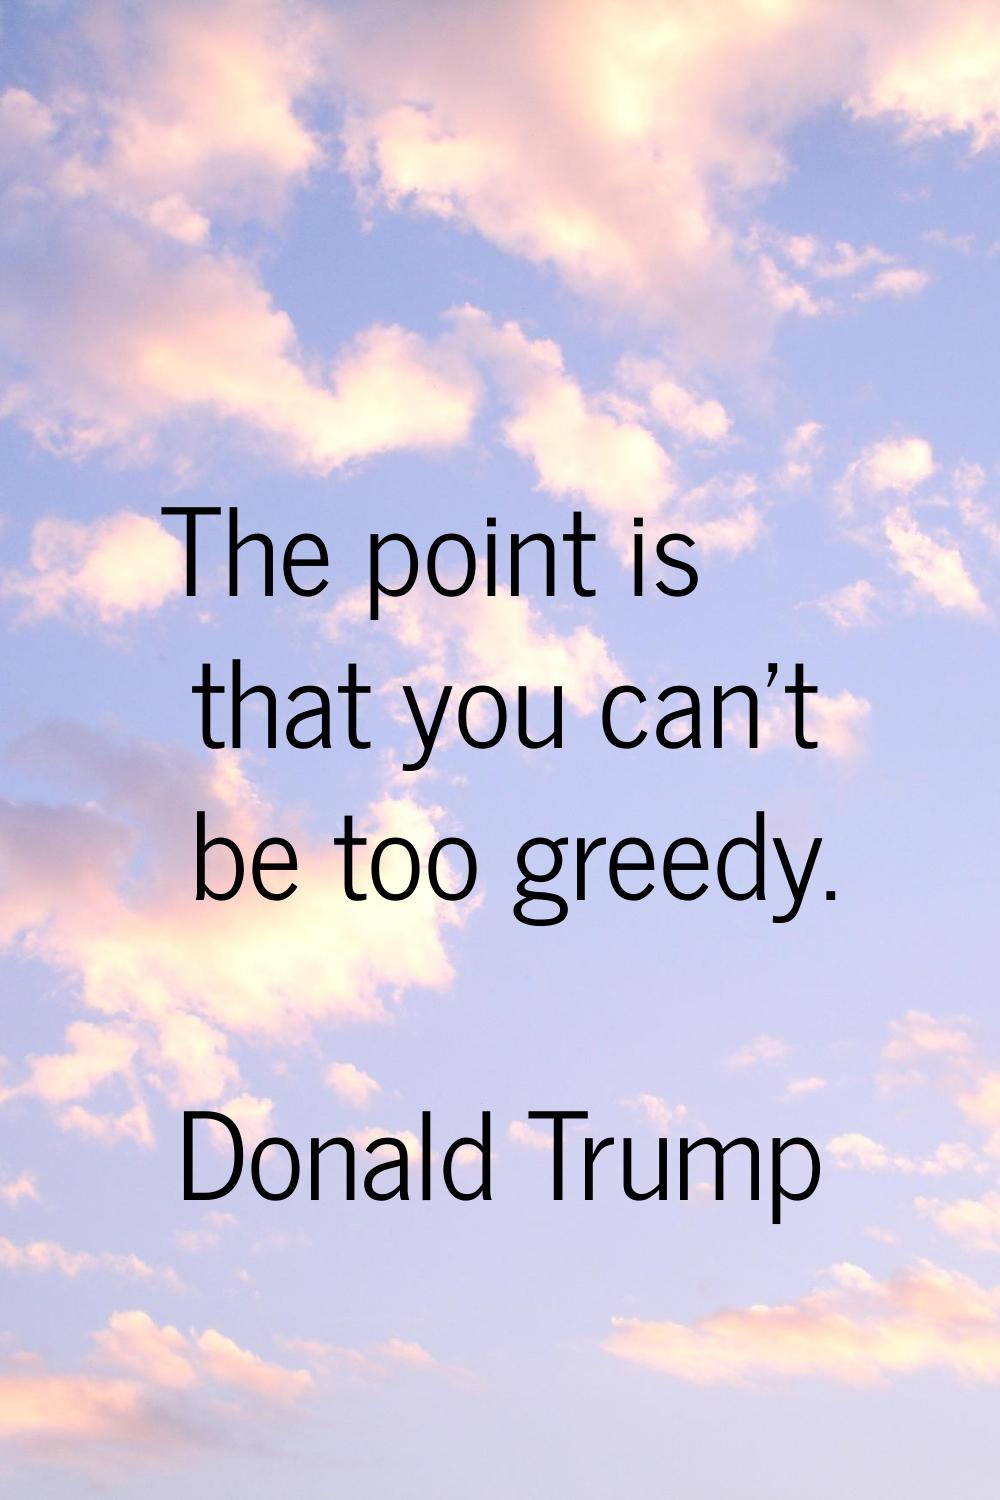 The point is that you can't be too greedy.